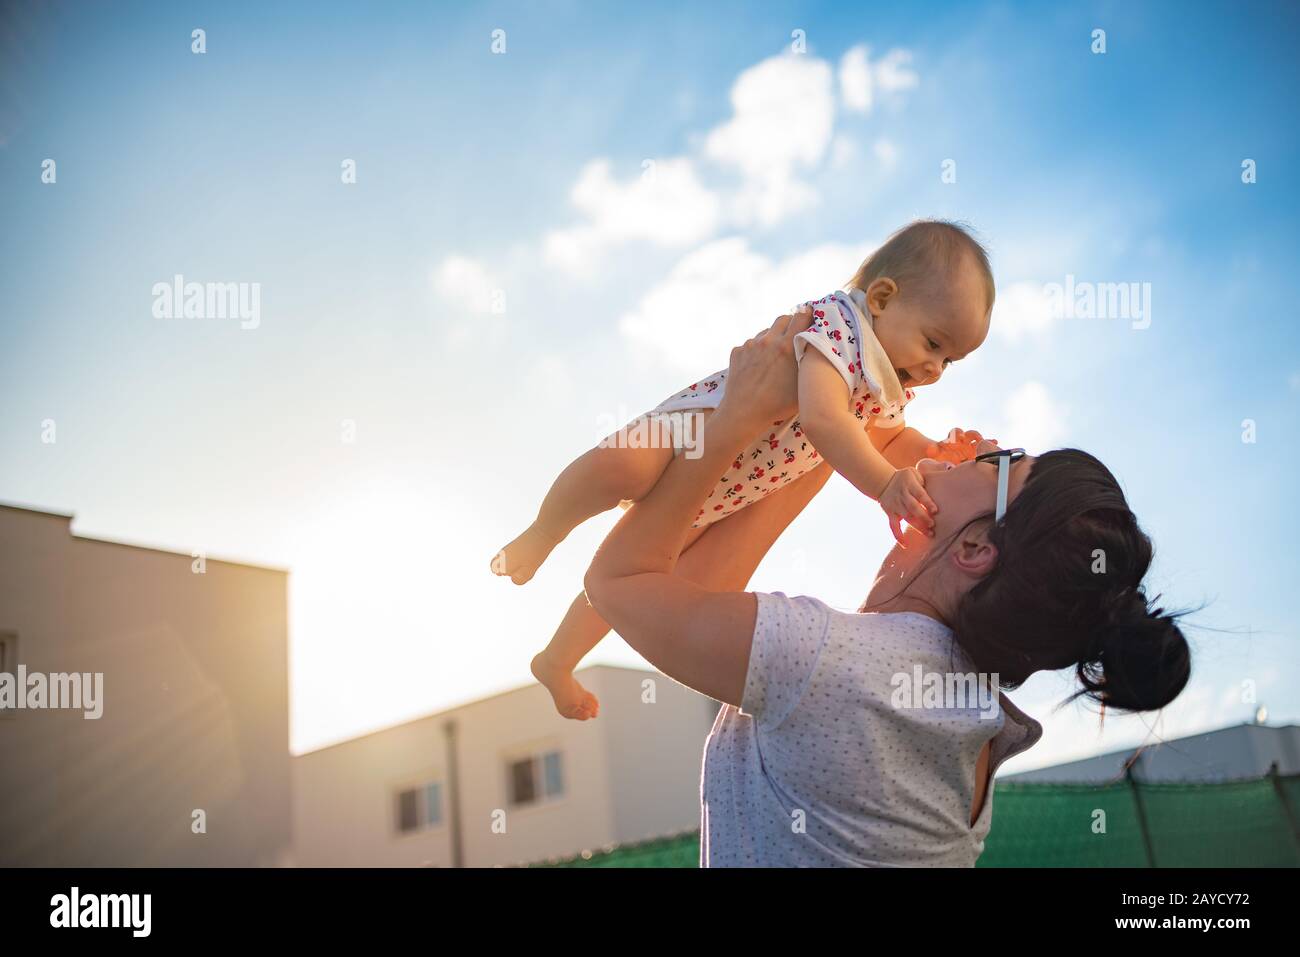 An emotional picture of 1 year old baby and her mother holding her up in the air against blue sky and bright sun Stock Photo